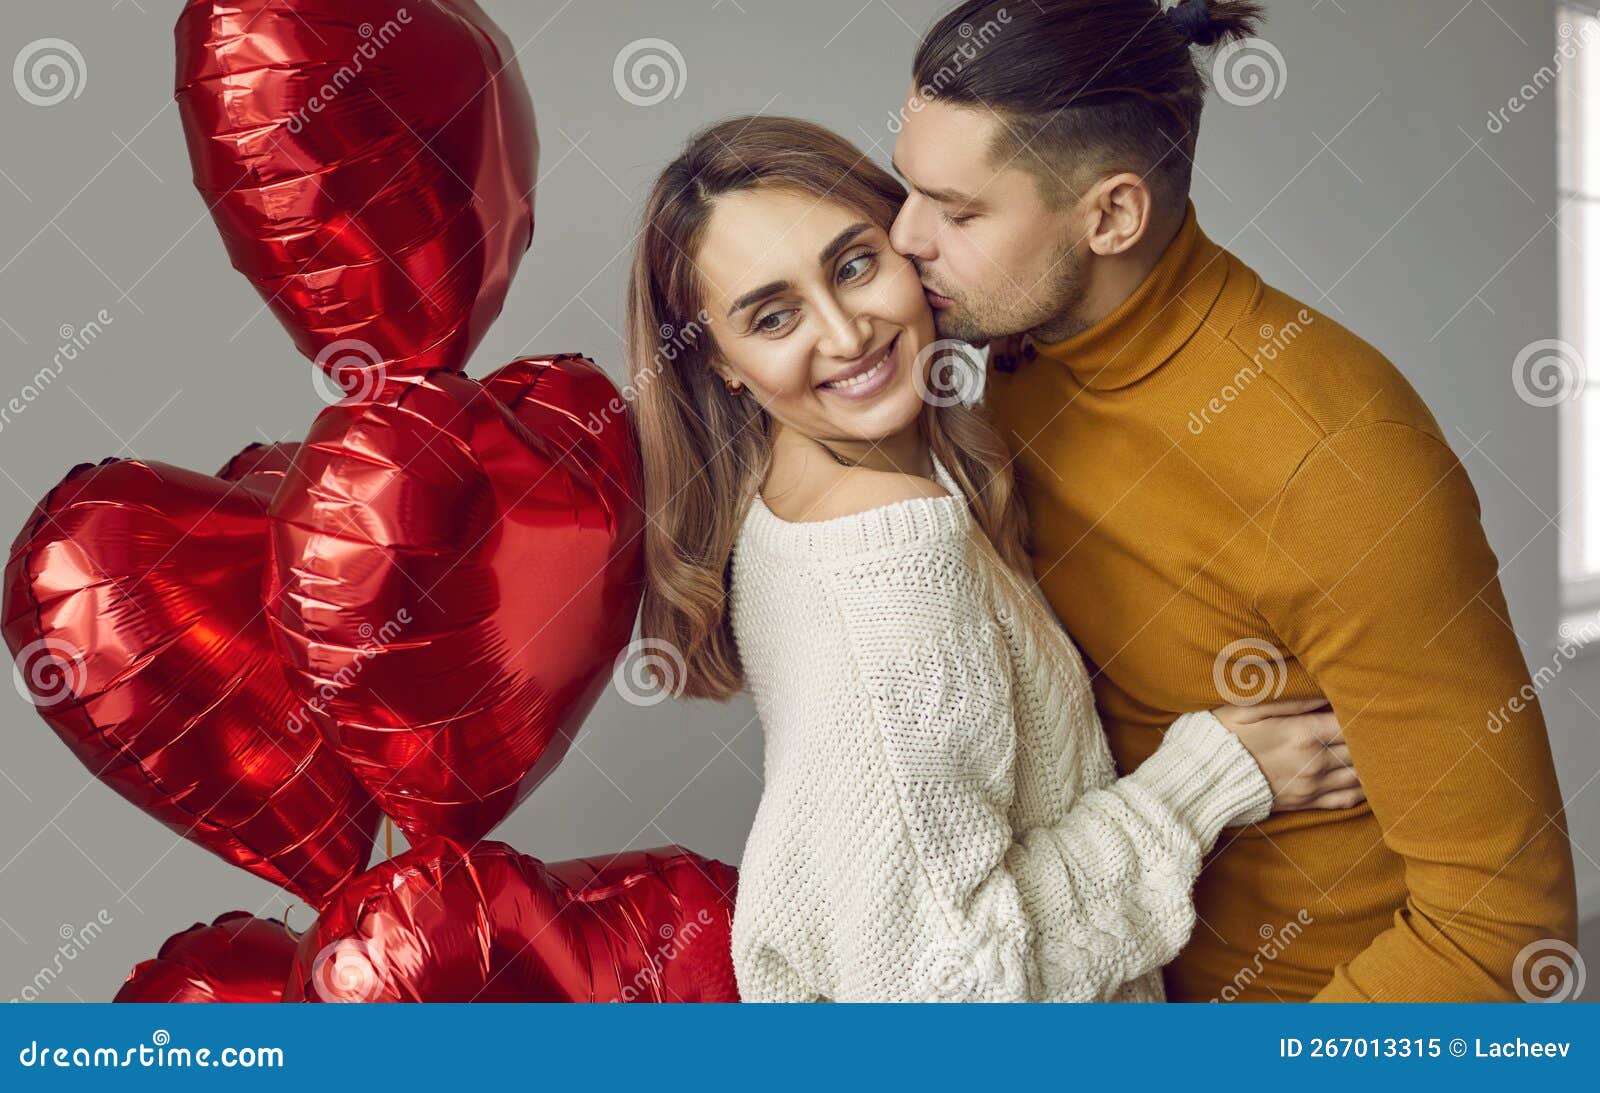 Man Hugs His Woman Kisses Her On The Cheek And Gives Her Red Heart